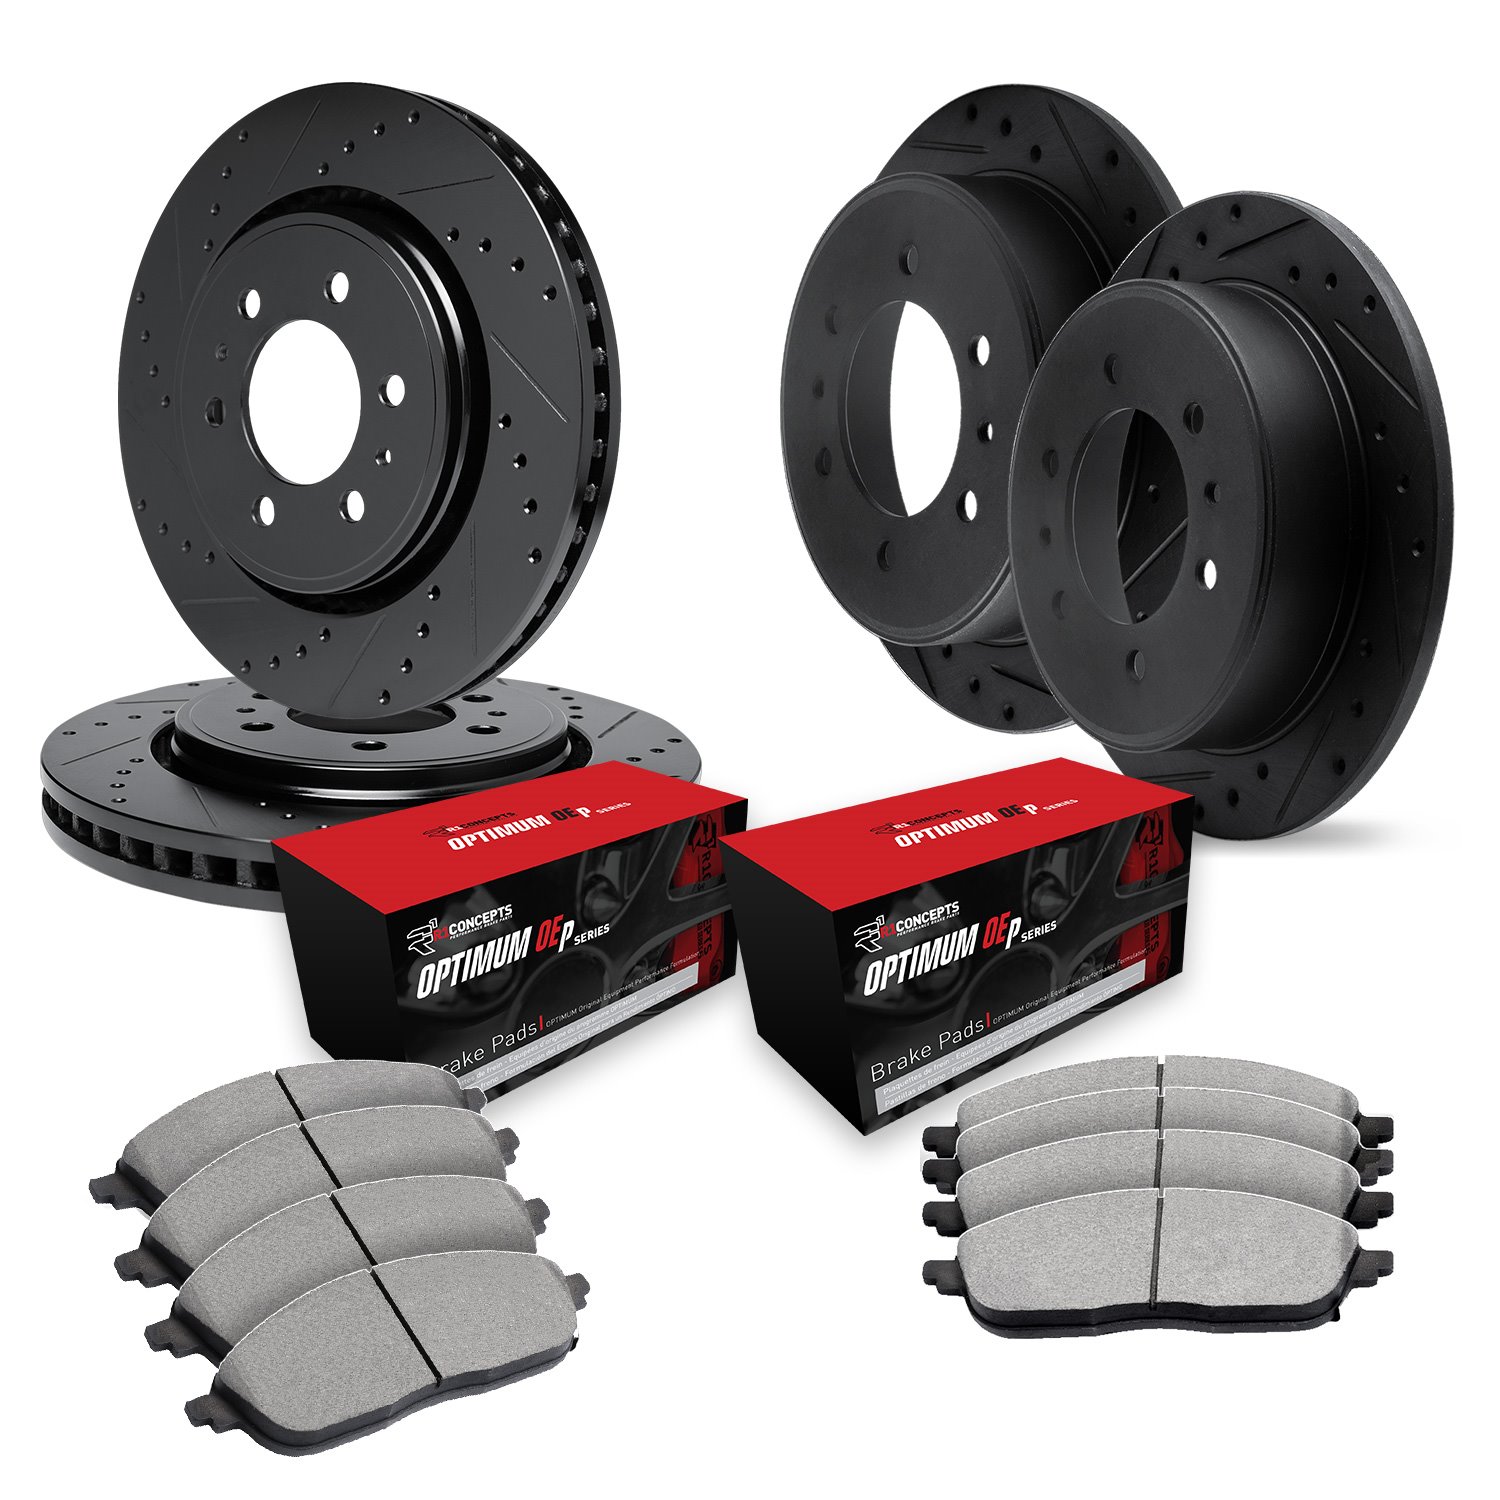 E-Line Drilled & Slotted Black Brake Rotor Set w/Optimum OE Pads, 1998-2000 Mitsubishi, Position: Front & Rear